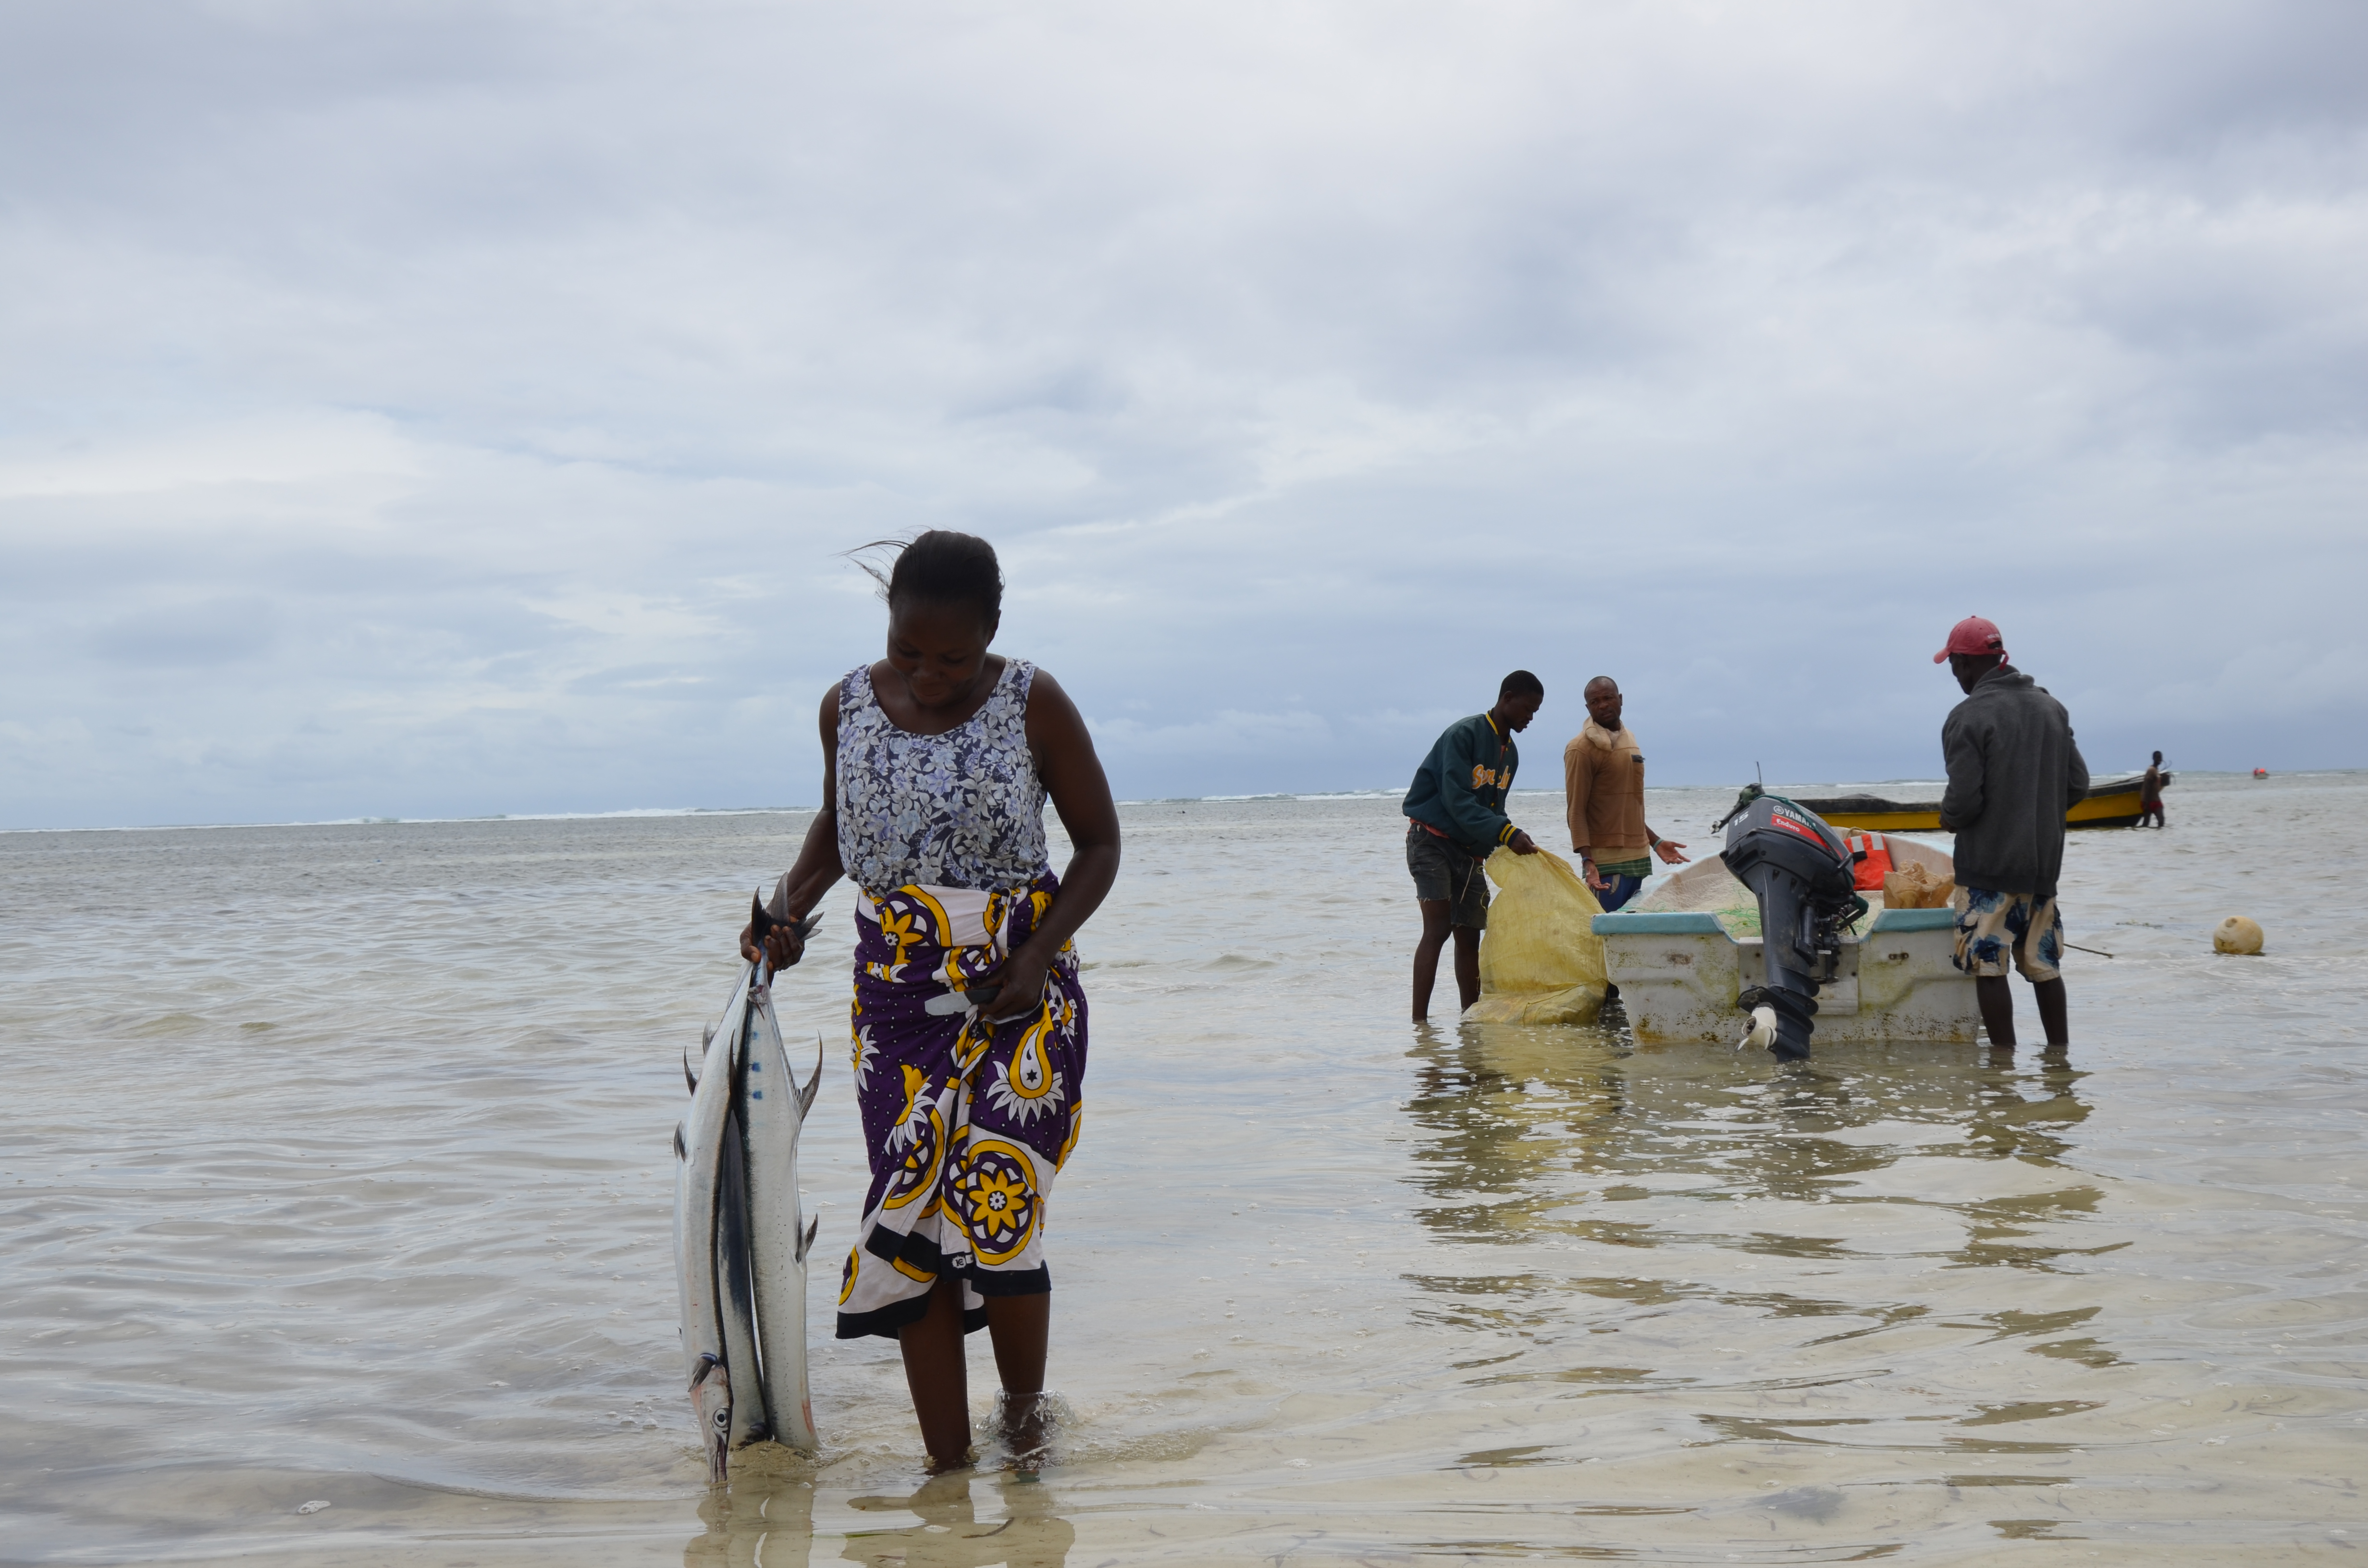 However,  unexpected severe floods along the Kenyan coast in November had highlighted the uncertainty of their livelihoods. During the four-month Kuzi (South East) Monsoon, from May to September, the sea is too rough to venture out. This is a difficult time when these fishers struggle to make ends meet. 